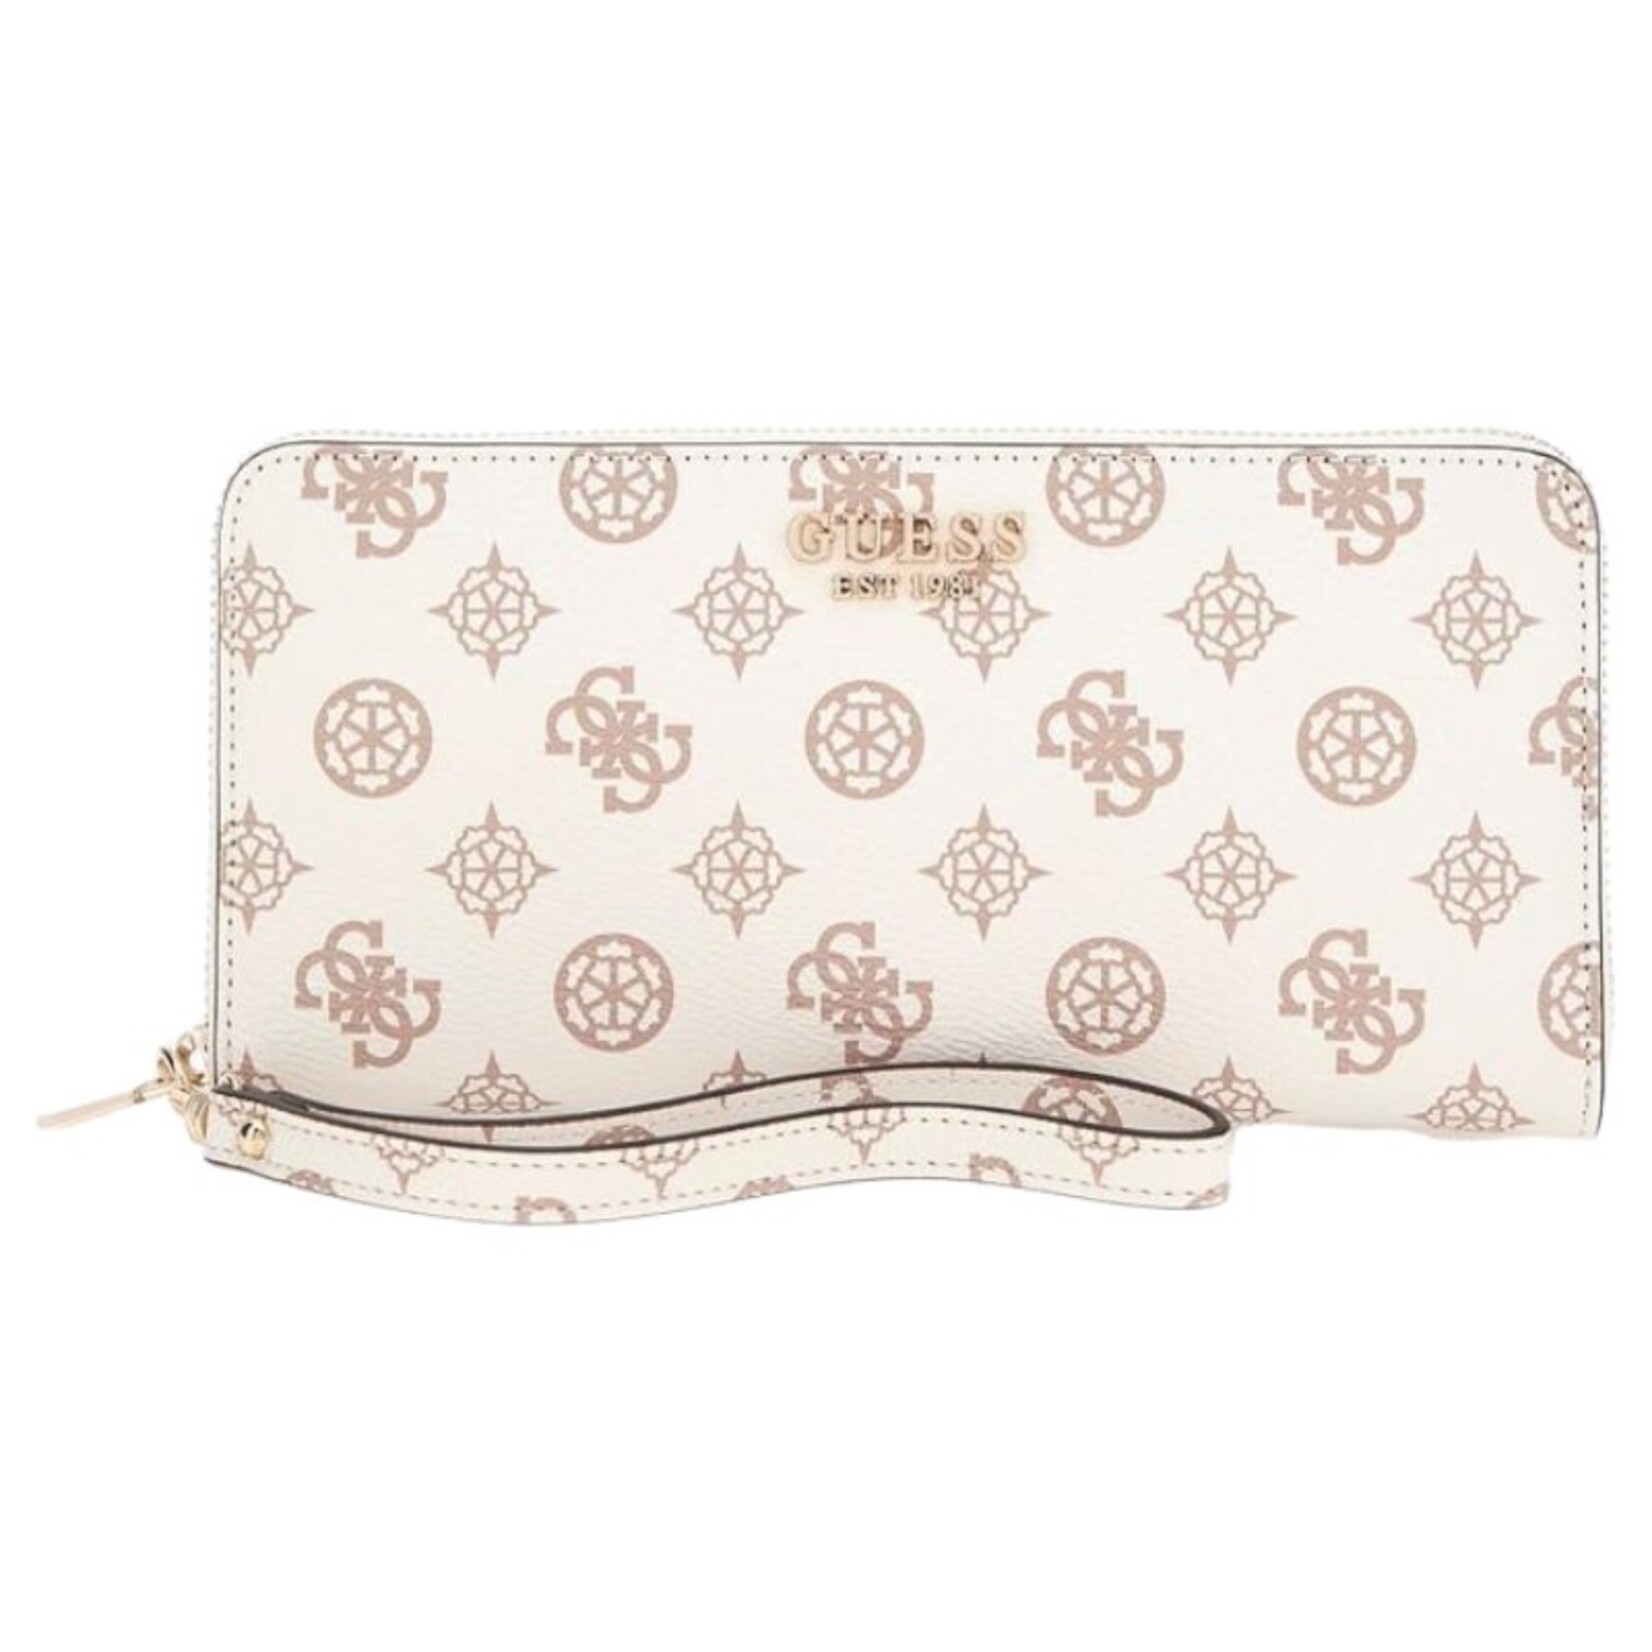 GUESS GUESS LARGE ZIP AROUND PATTERNED WALLET LAUREL SLG PG850046